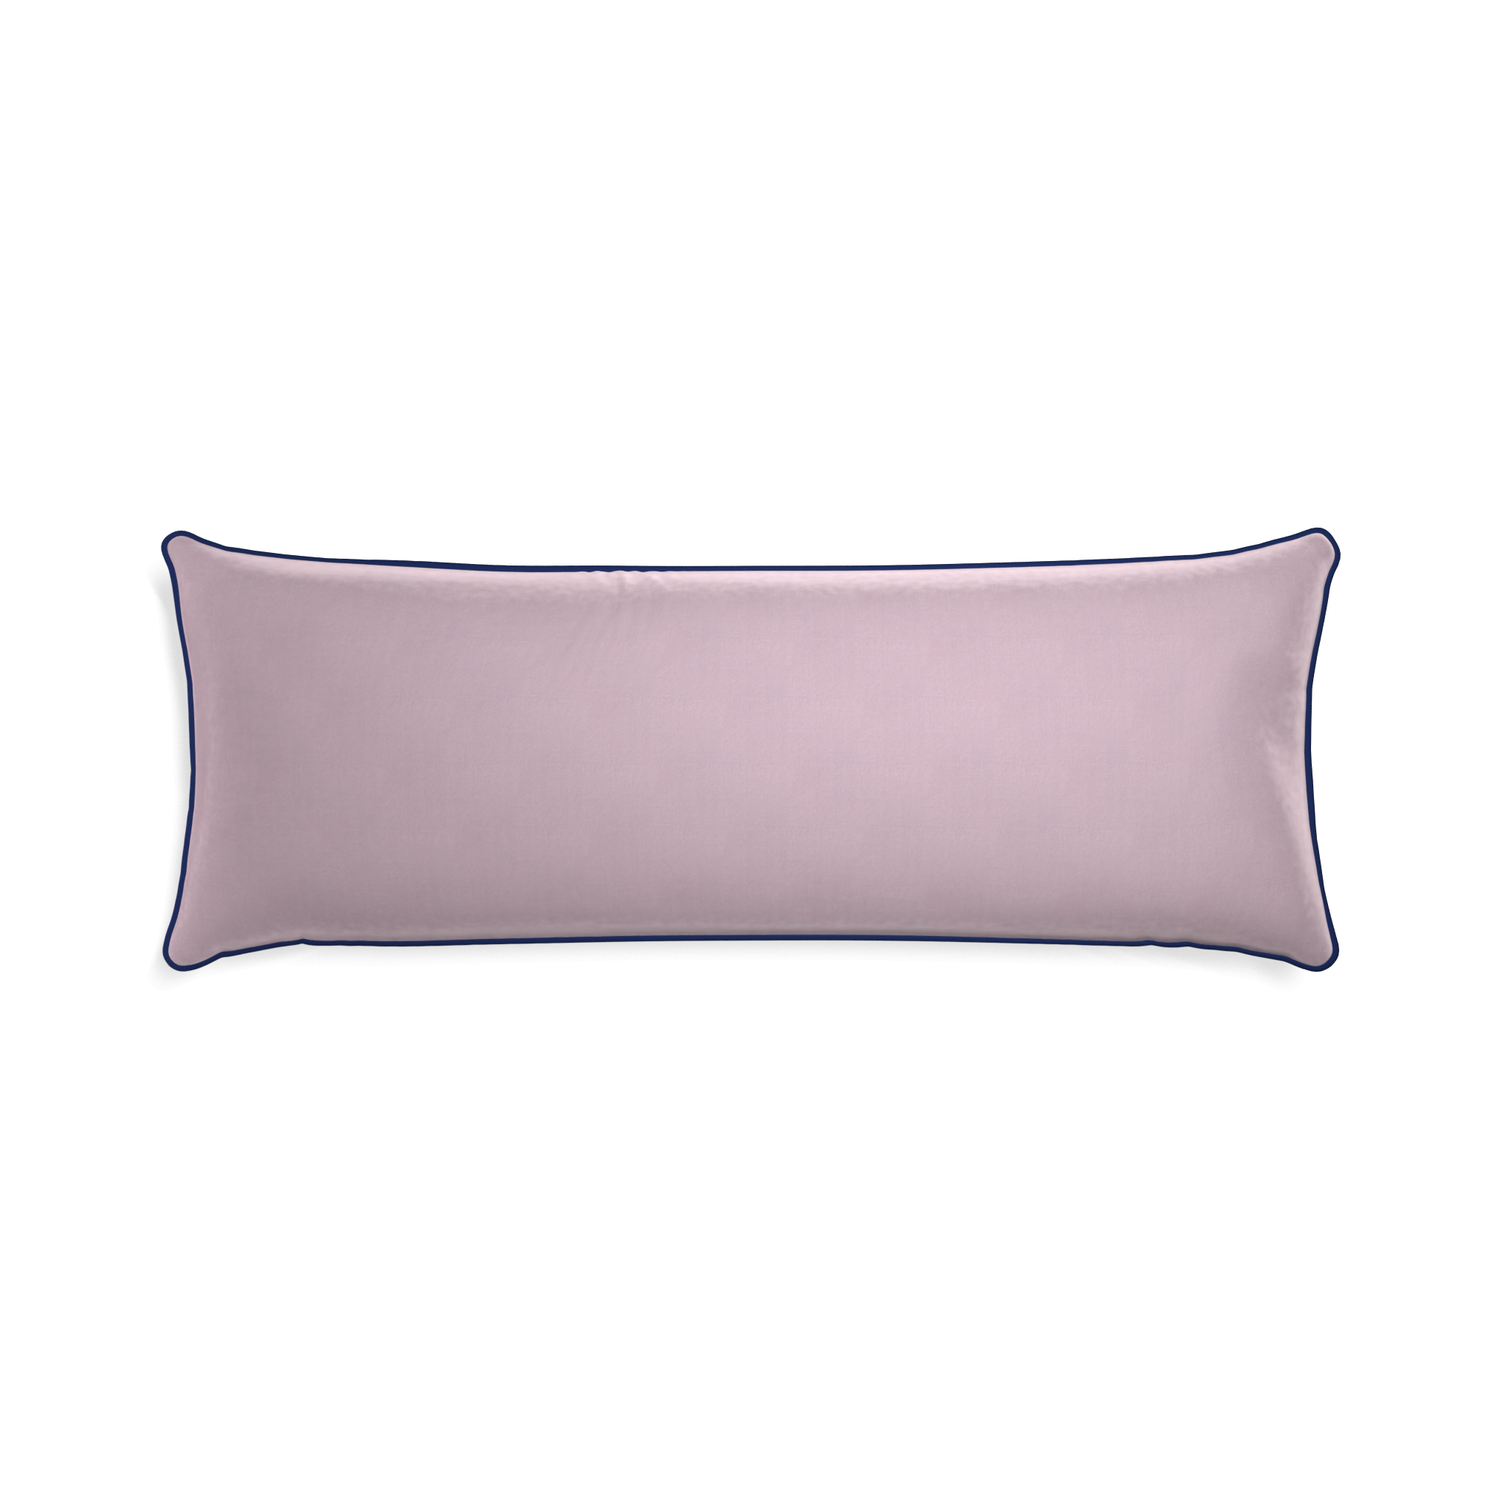 Xl-lumbar lilac velvet custom lilacpillow with midnight piping on white background